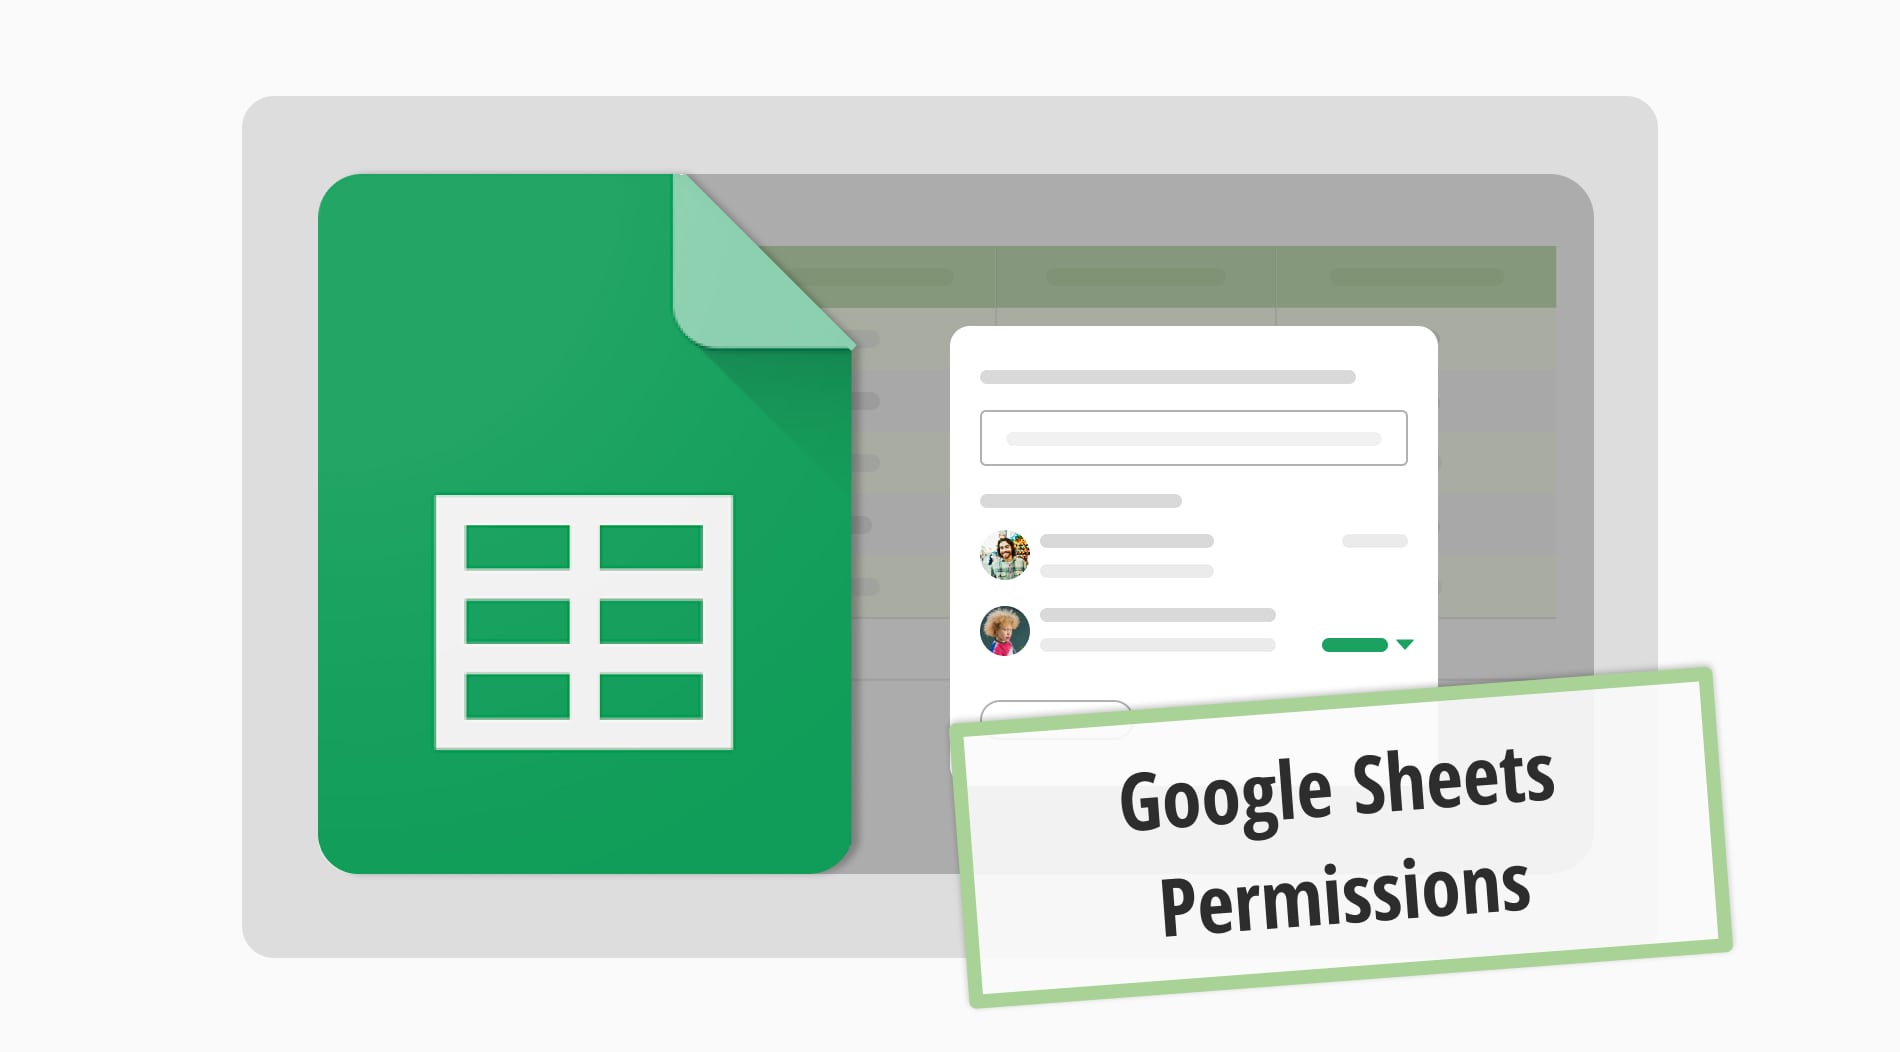 A full guide to Google Sheets permissions